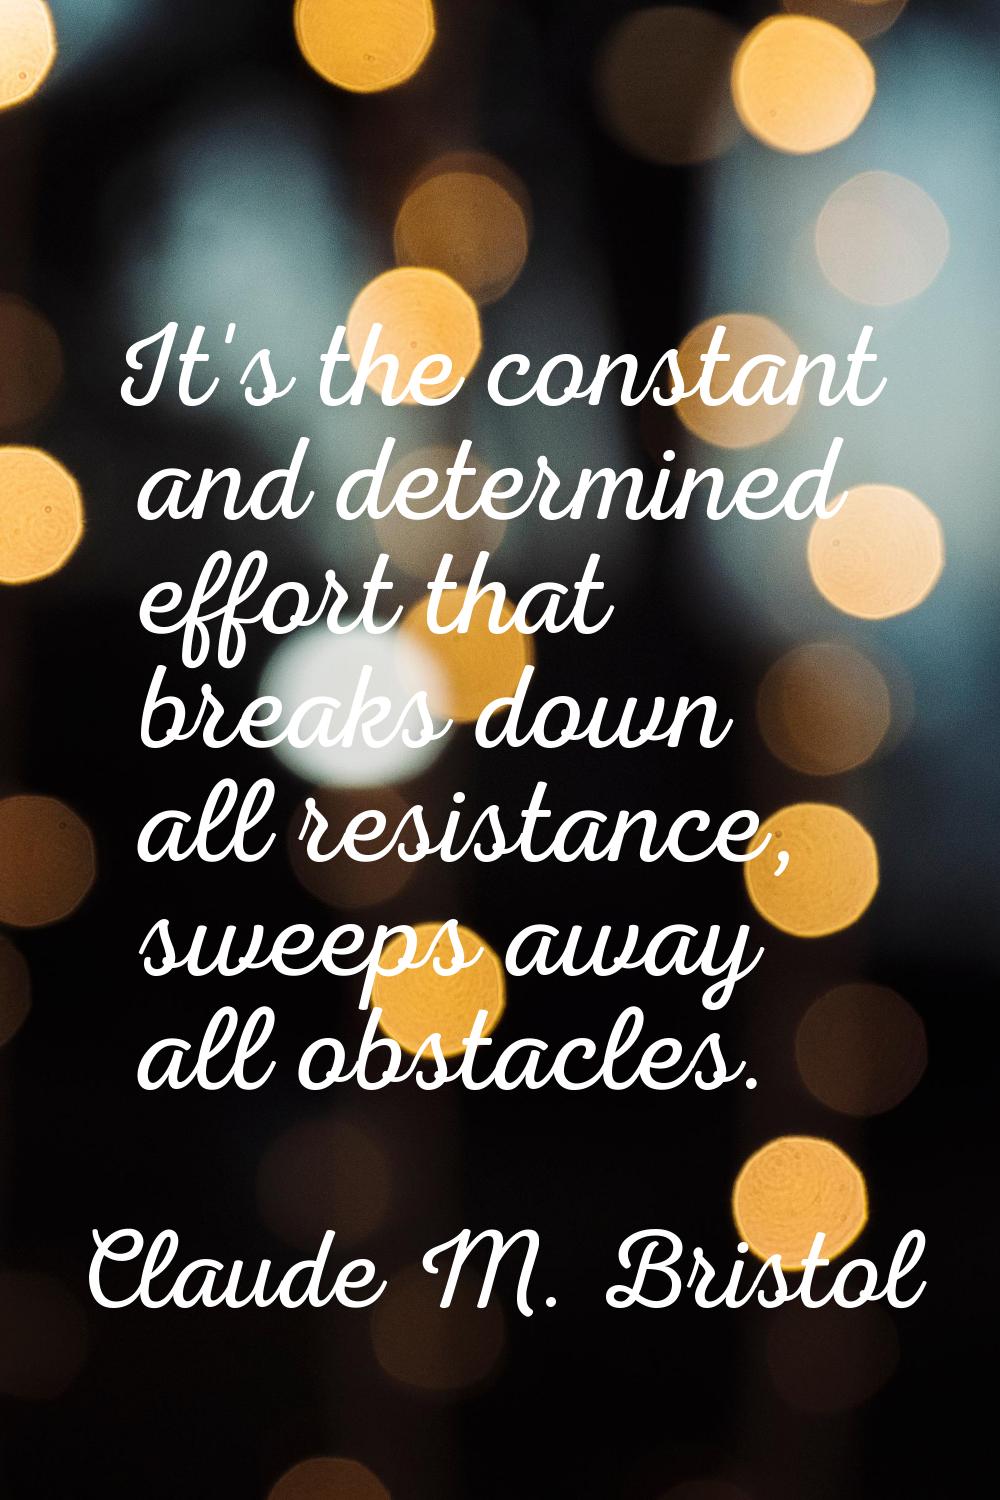 It's the constant and determined effort that breaks down all resistance, sweeps away all obstacles.